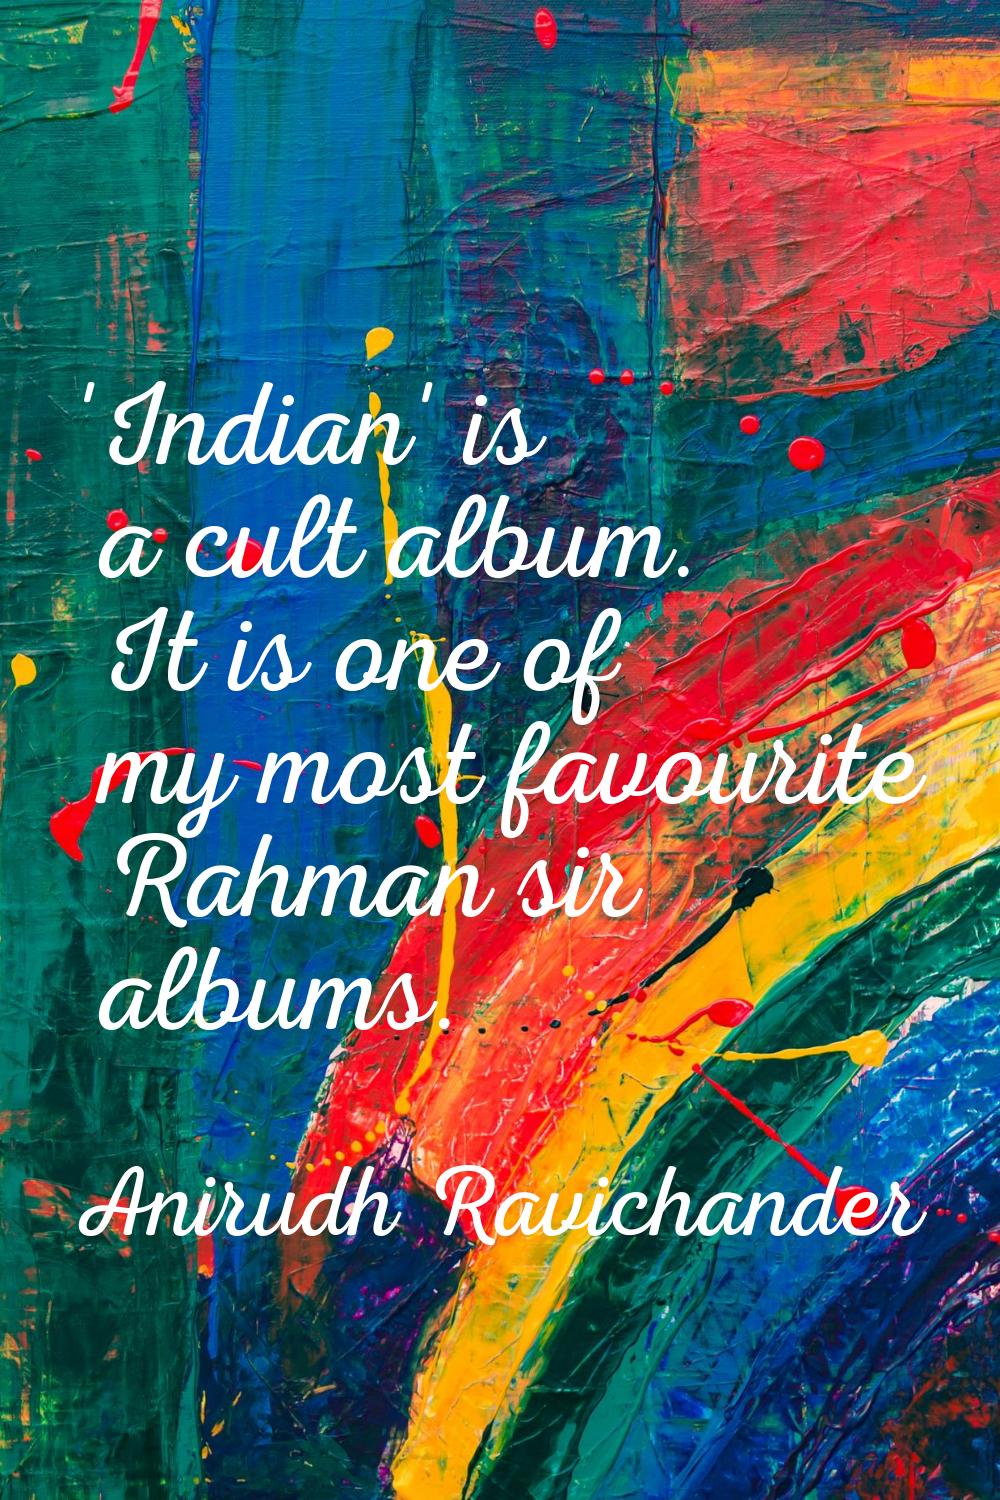 'Indian' is a cult album. It is one of my most favourite Rahman sir albums.